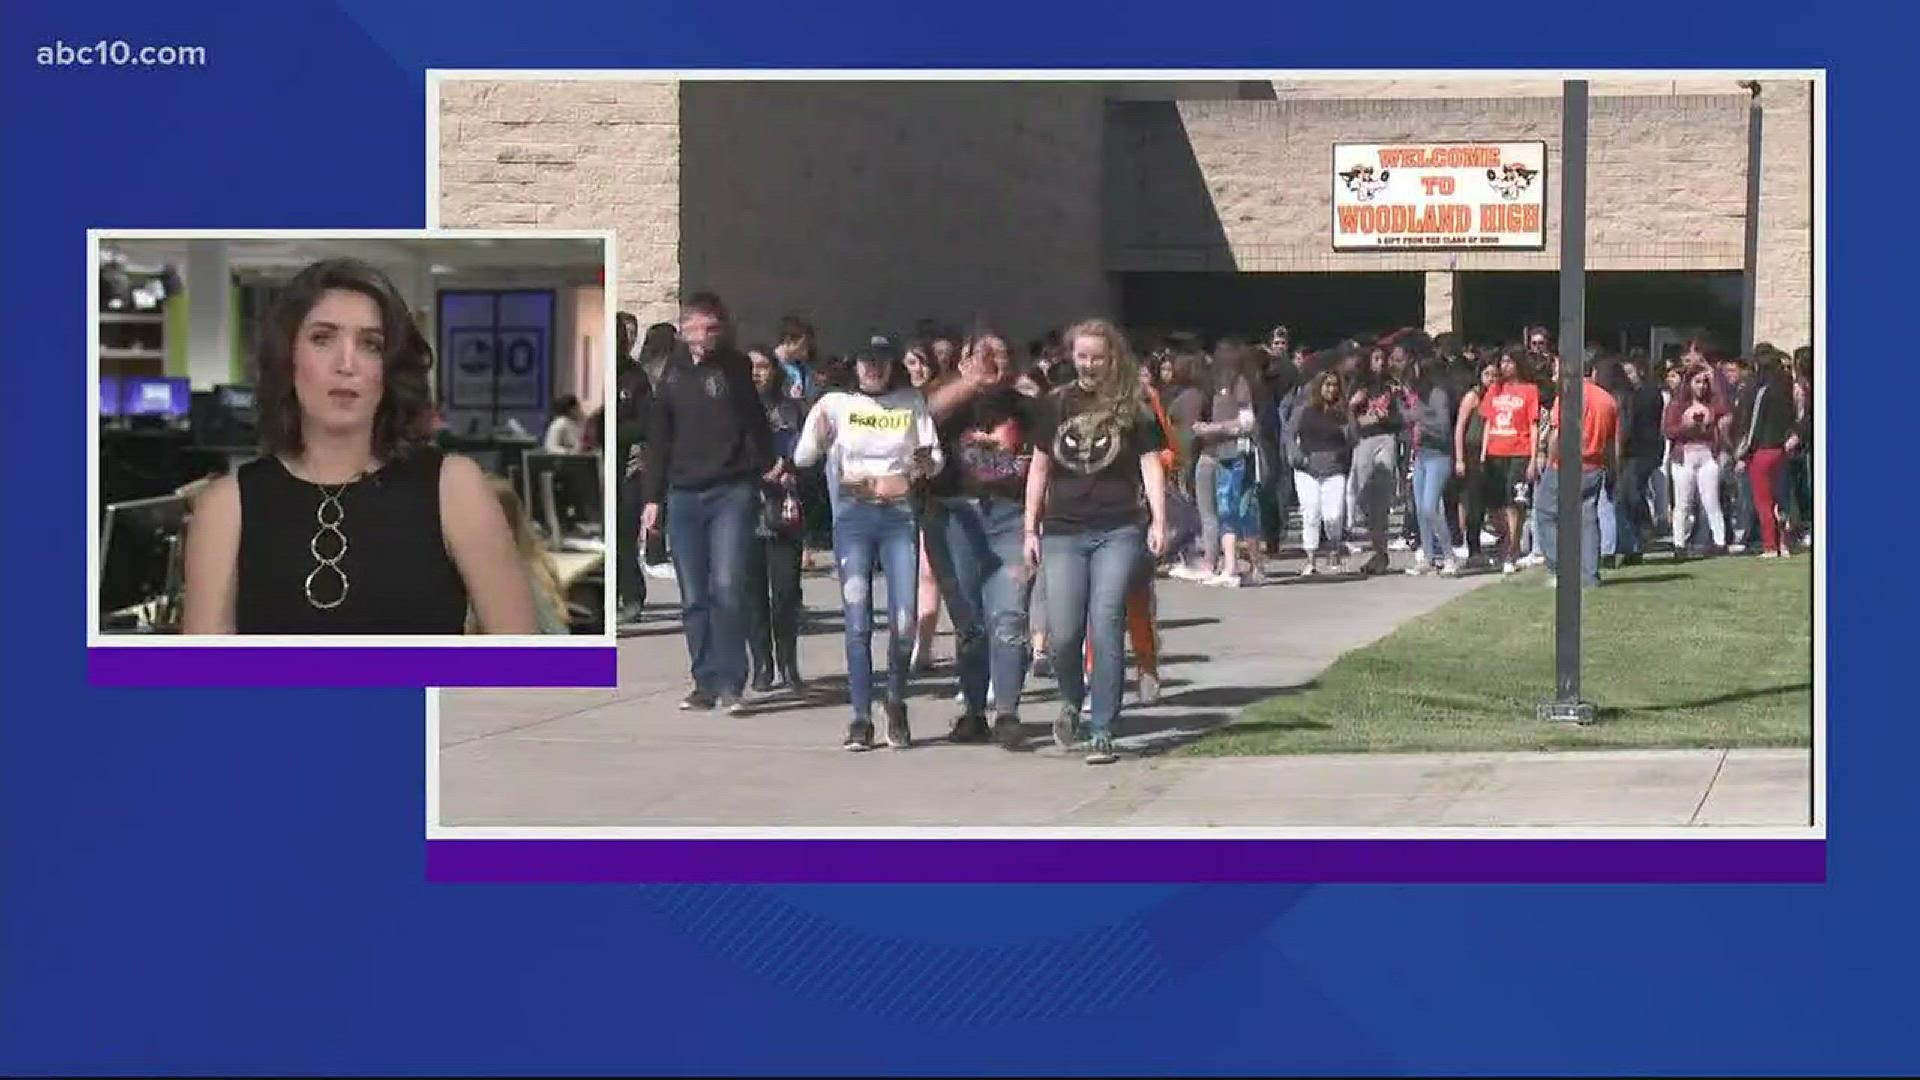 Students across the nation walk out of classrooms to remember the Columbine High school shooting victims. (April 20, 2018)